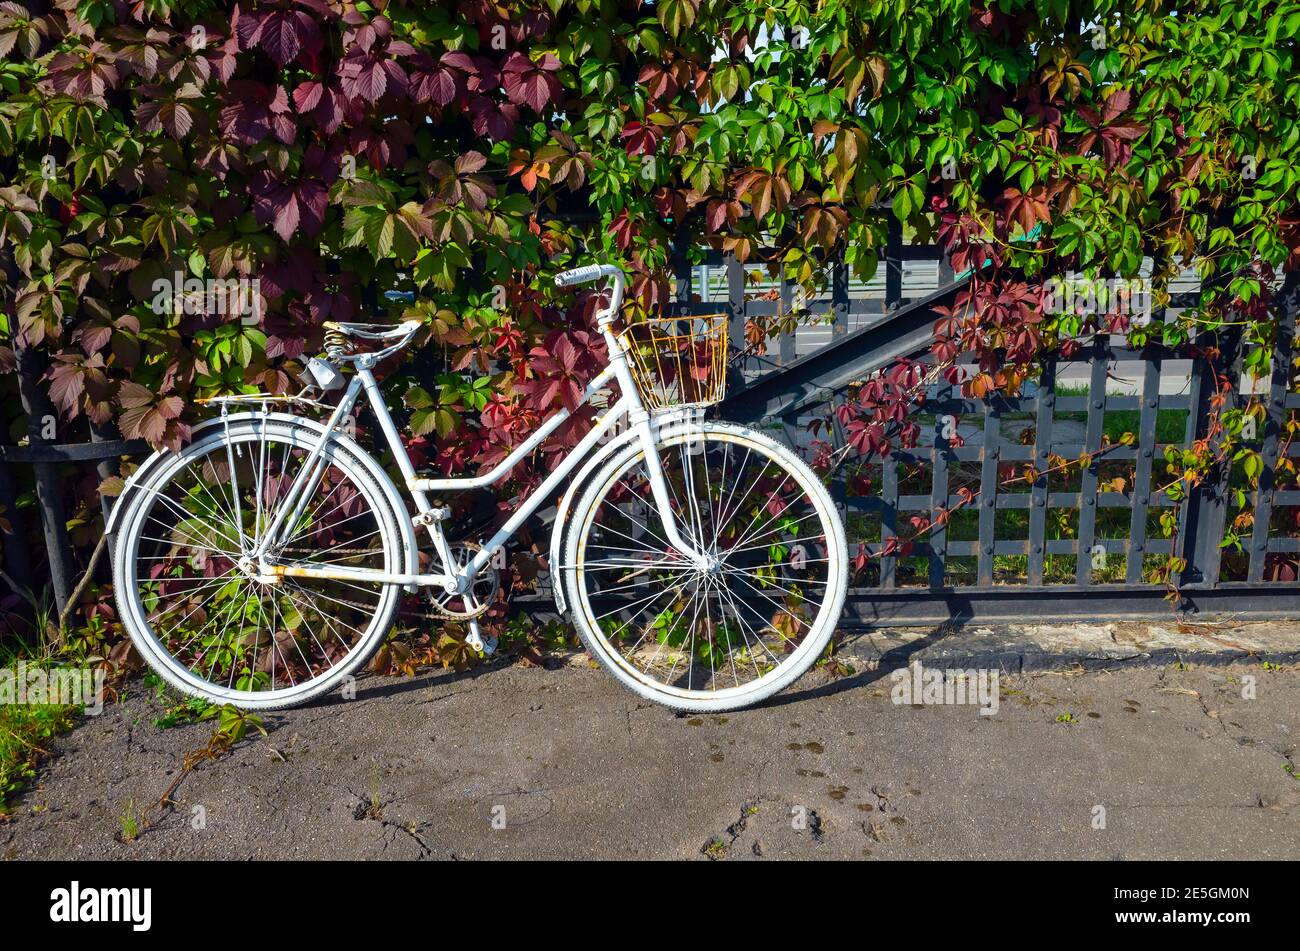 White vintage bicycle stands near old metal grate with decorative plant Stock Photo